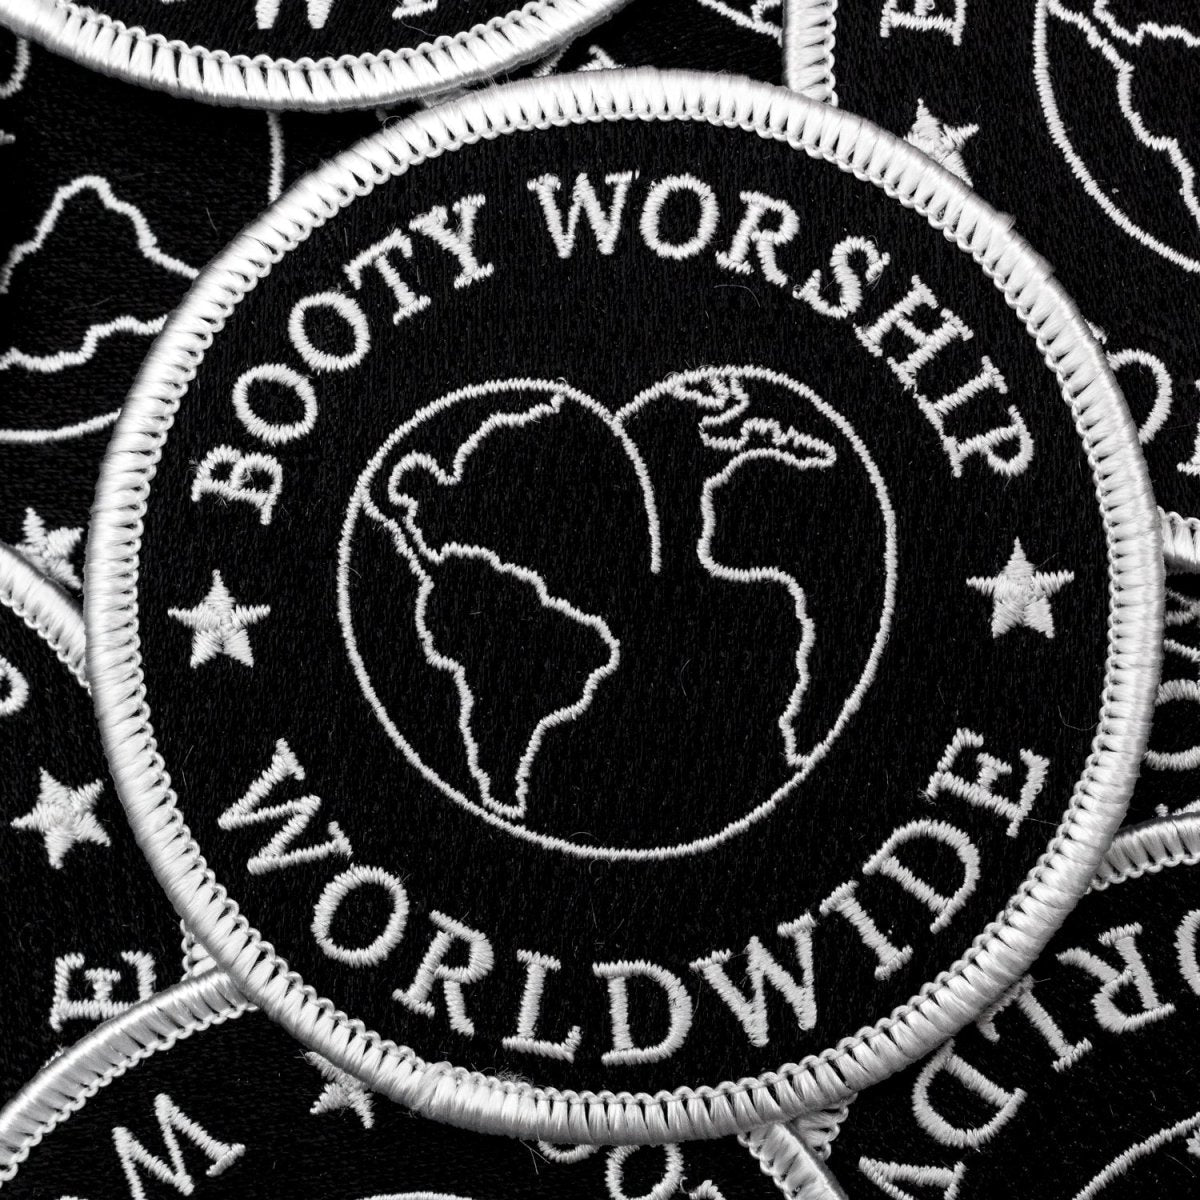 Booty Worship Worldwide Club Patch - Patch - Pretty Bad Co.